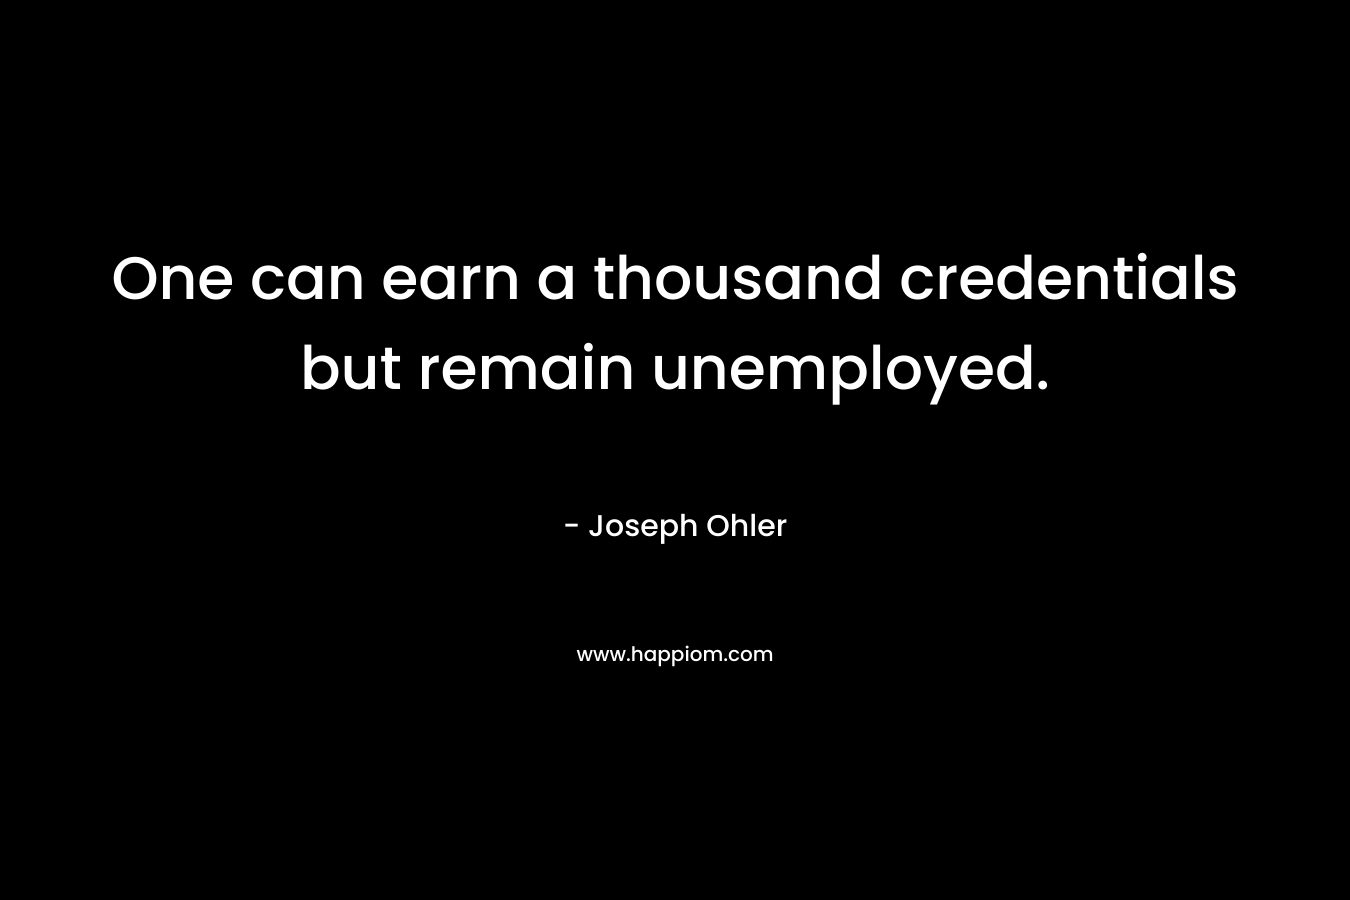 One can earn a thousand credentials but remain unemployed. – Joseph Ohler